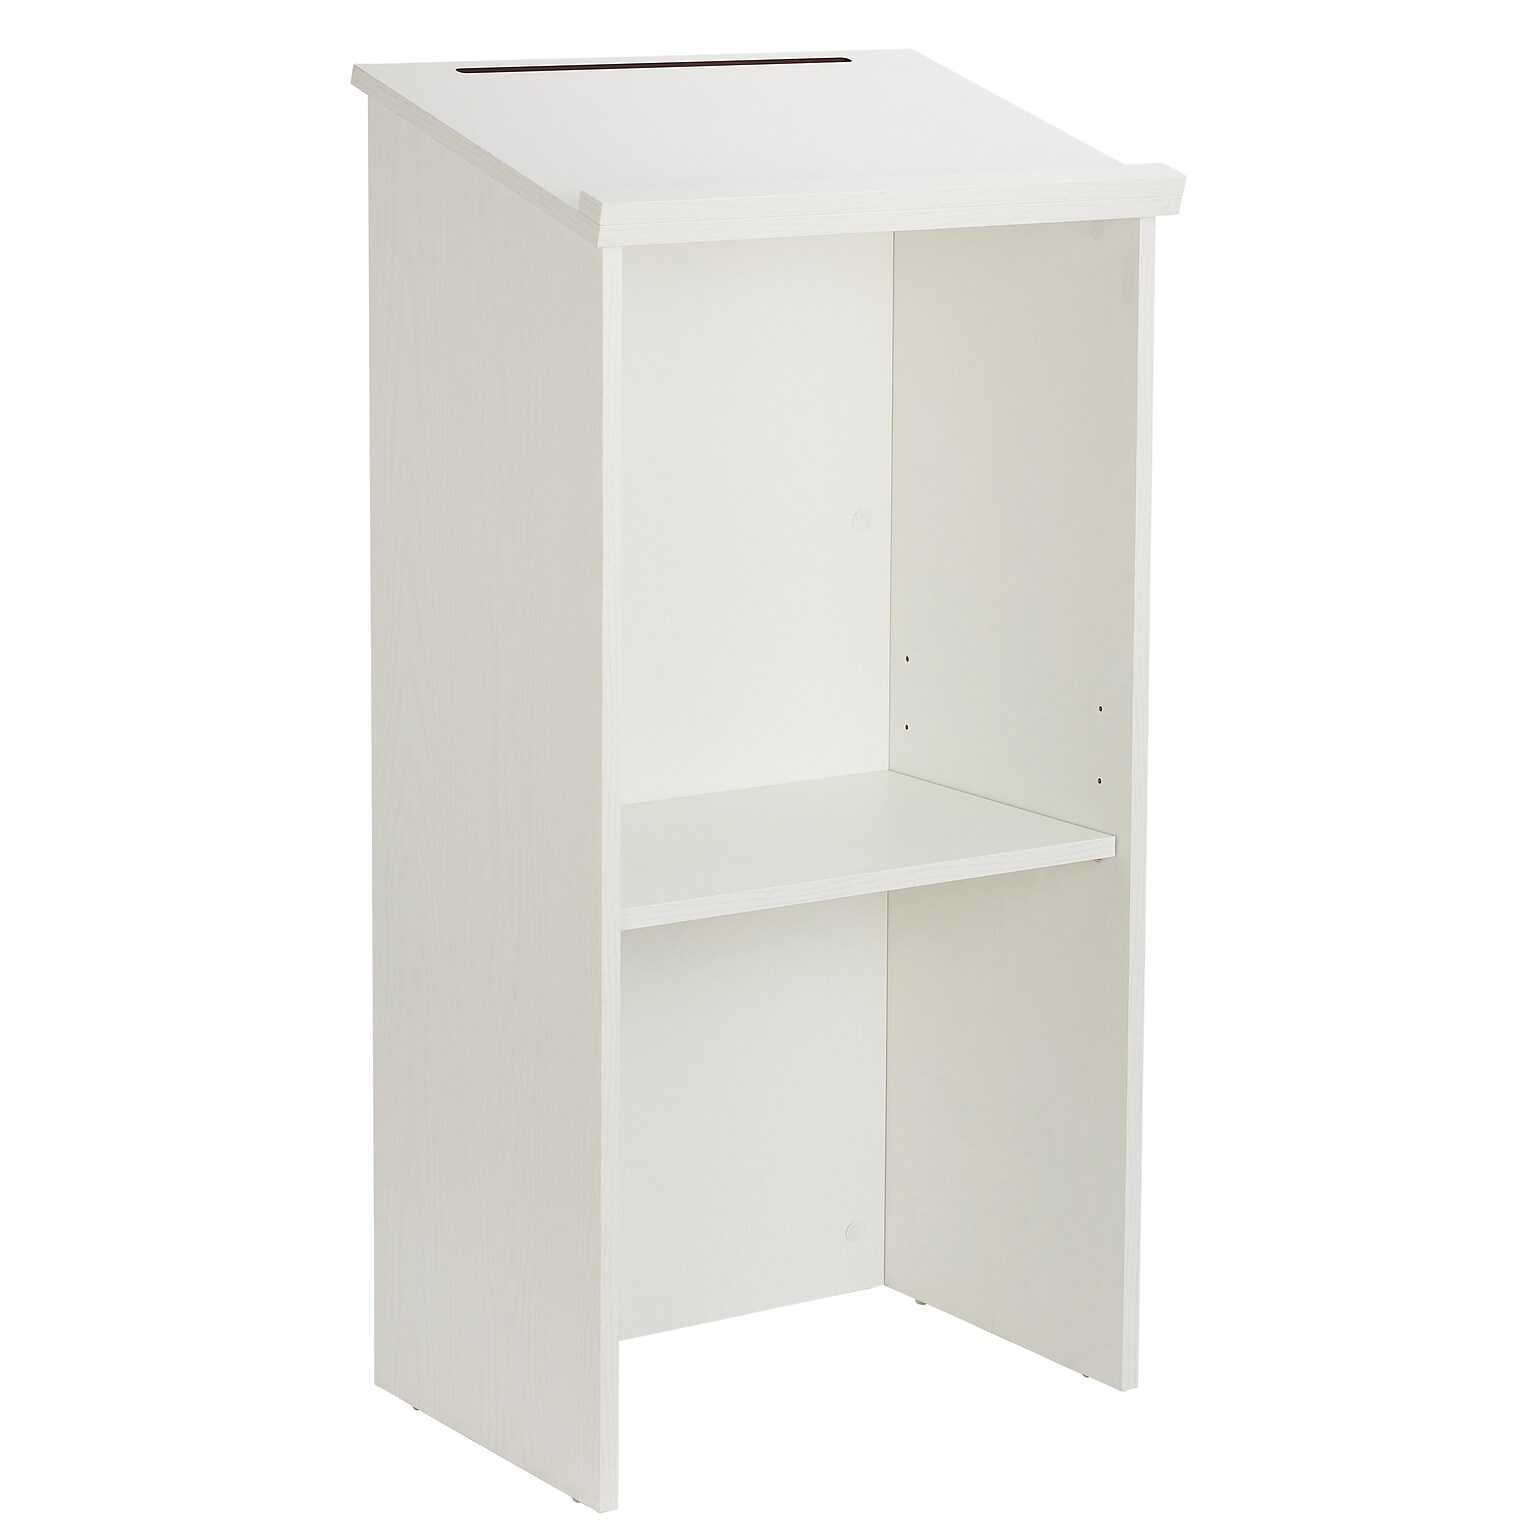 AdirOffice 46 Podium Lectern with Cover, White (661-01-WHI)